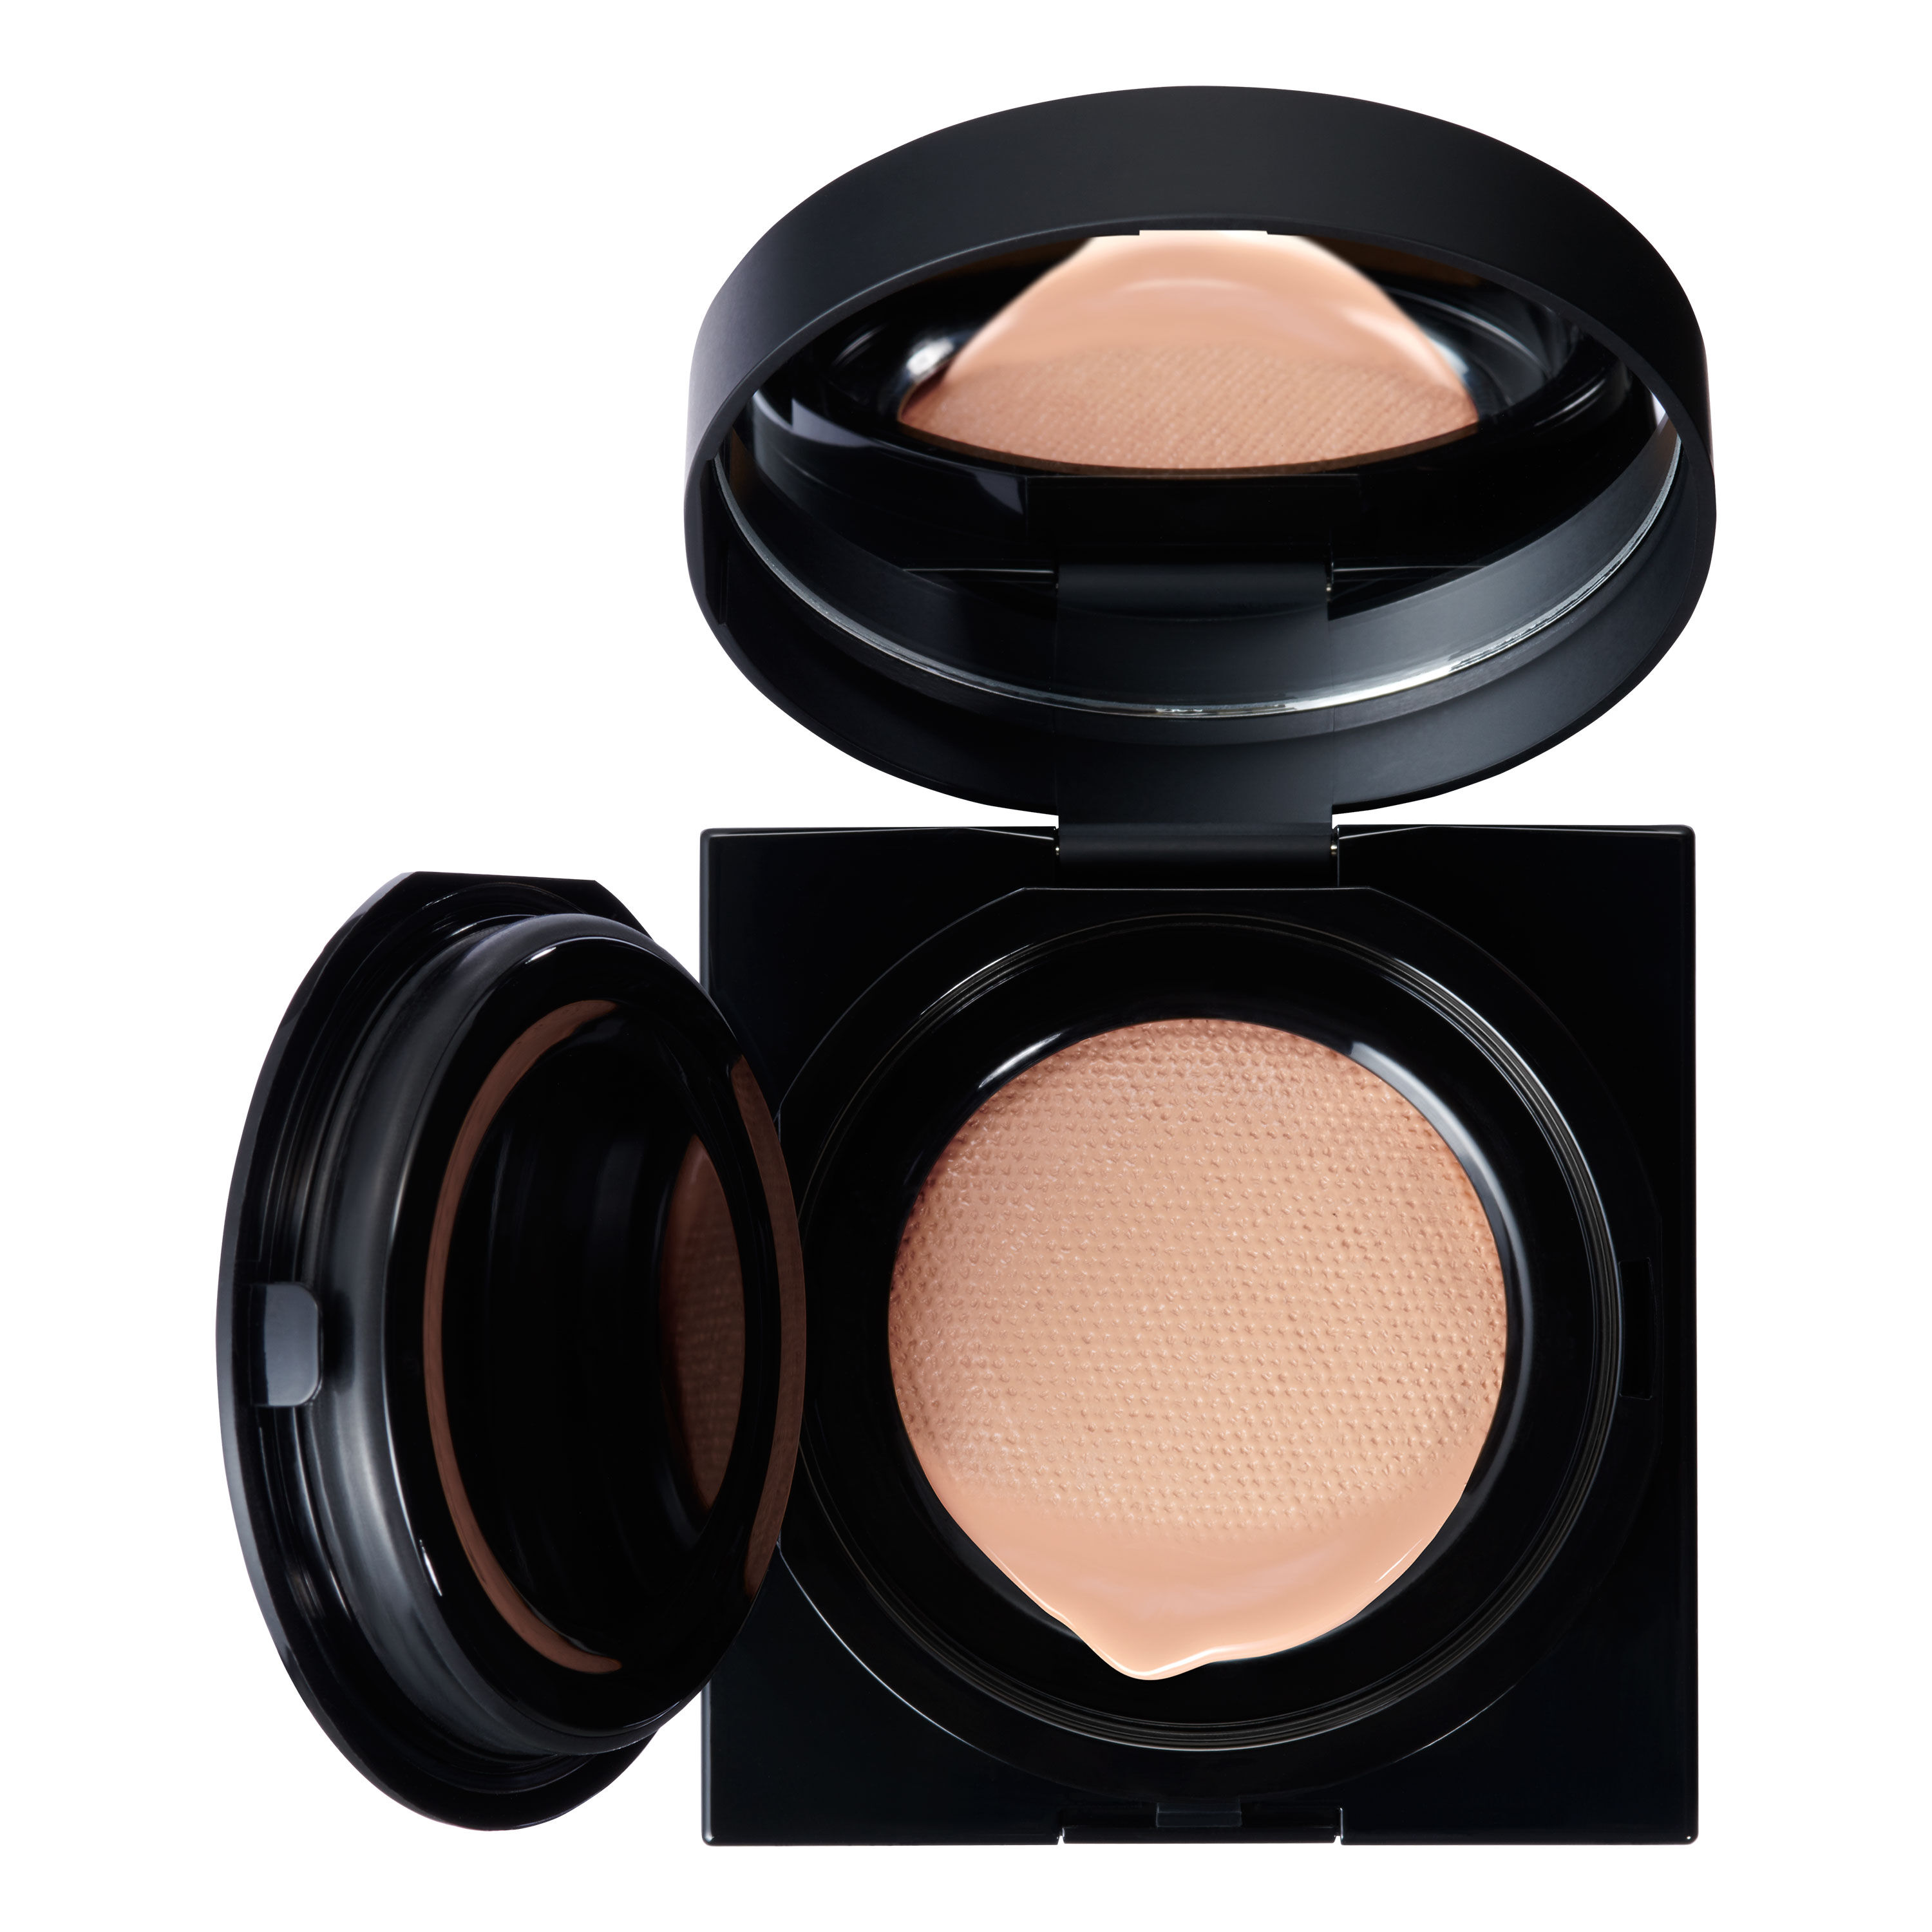 unlimited breathable cushion foundation – lasting semi-matte look ...